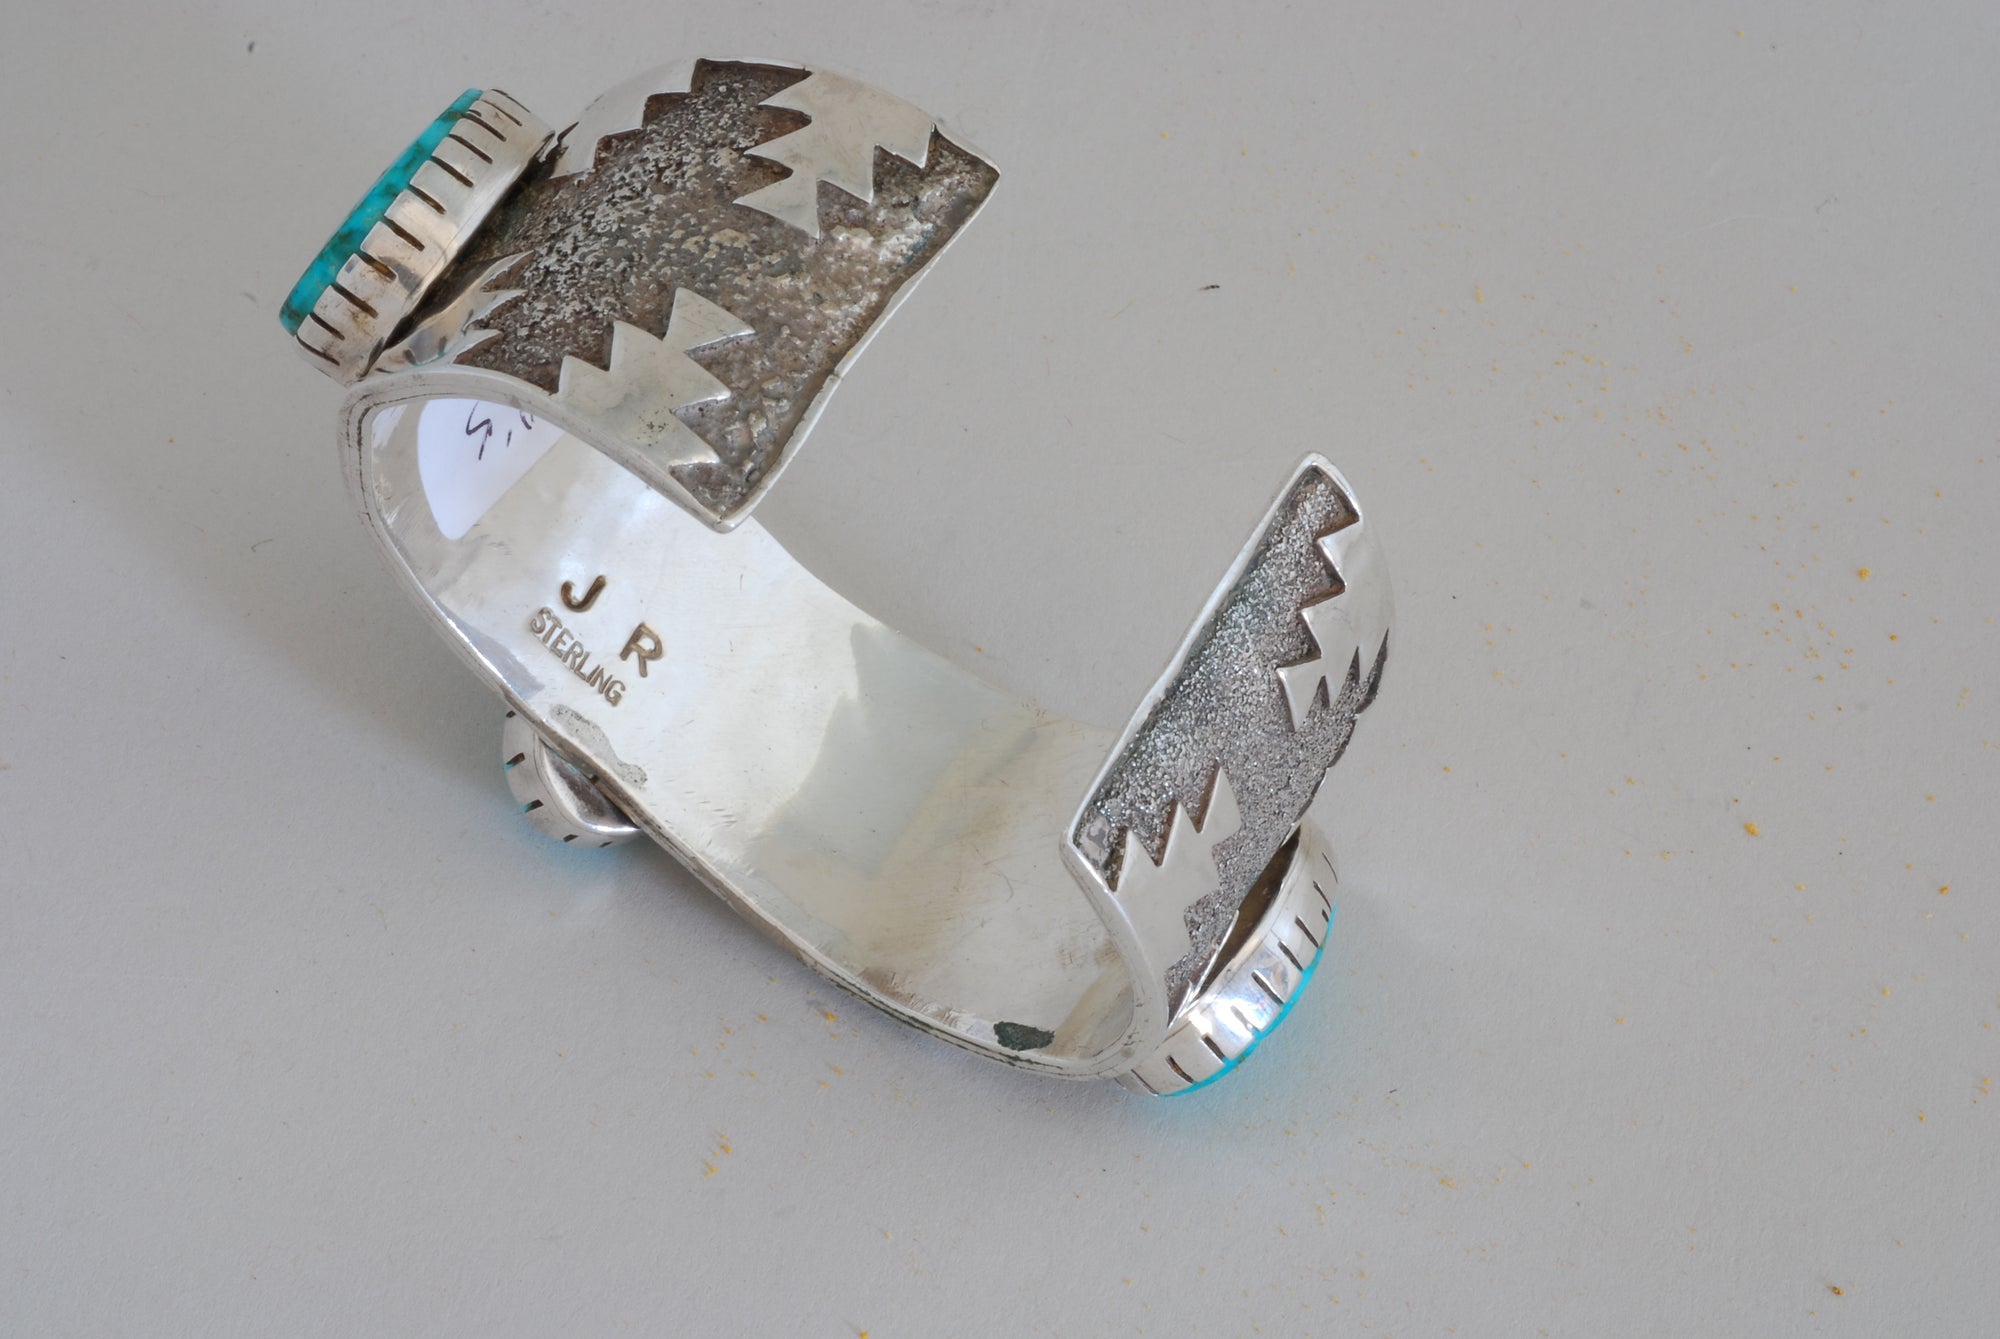 Man's Cuff Bracelet with Turquoise